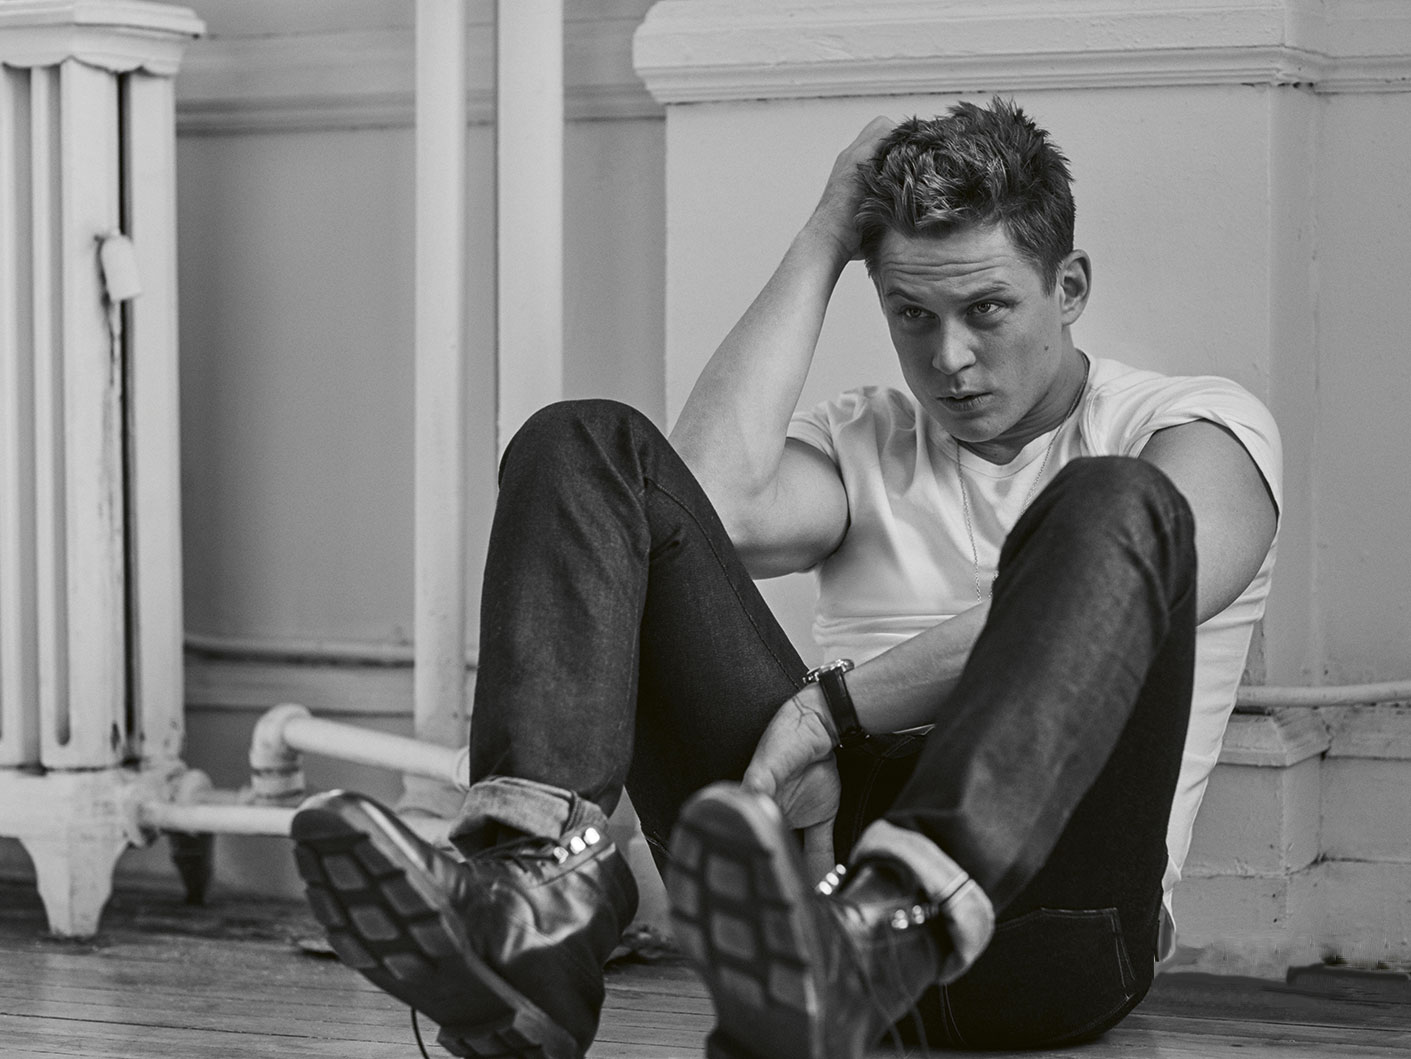 Billy Magnussen Picture